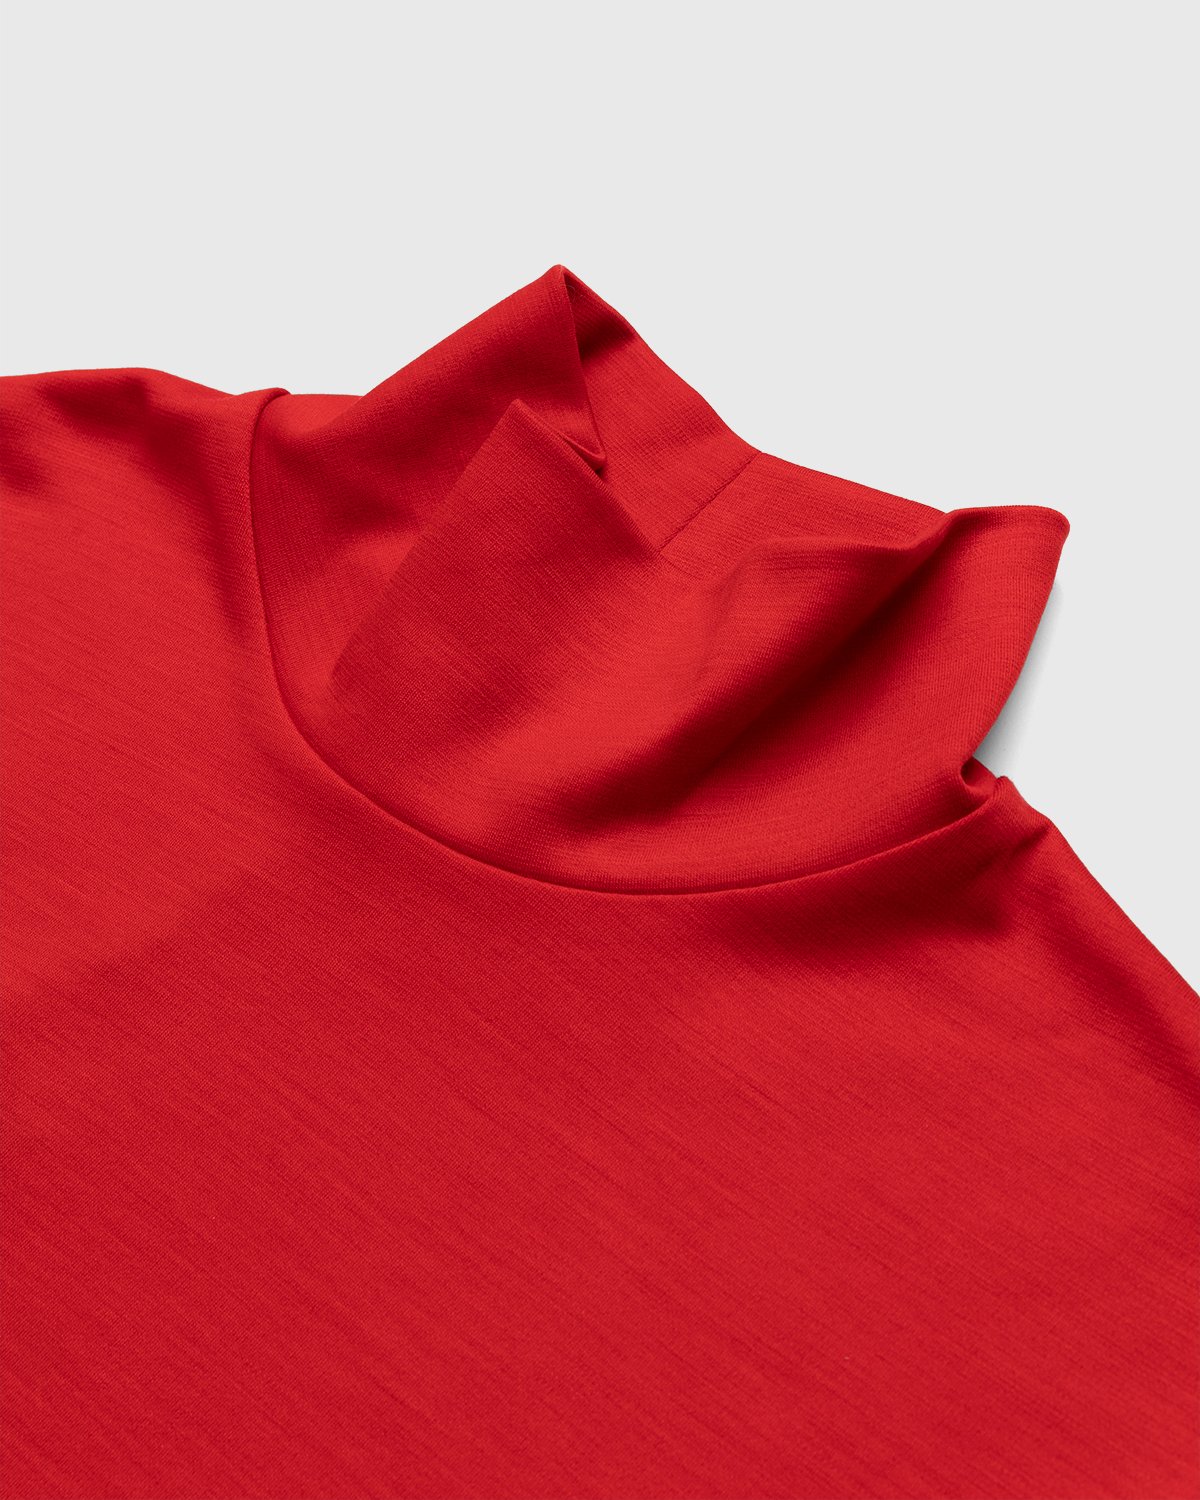 Phipps - Turtleneck Flame - Clothing - Red - Image 3